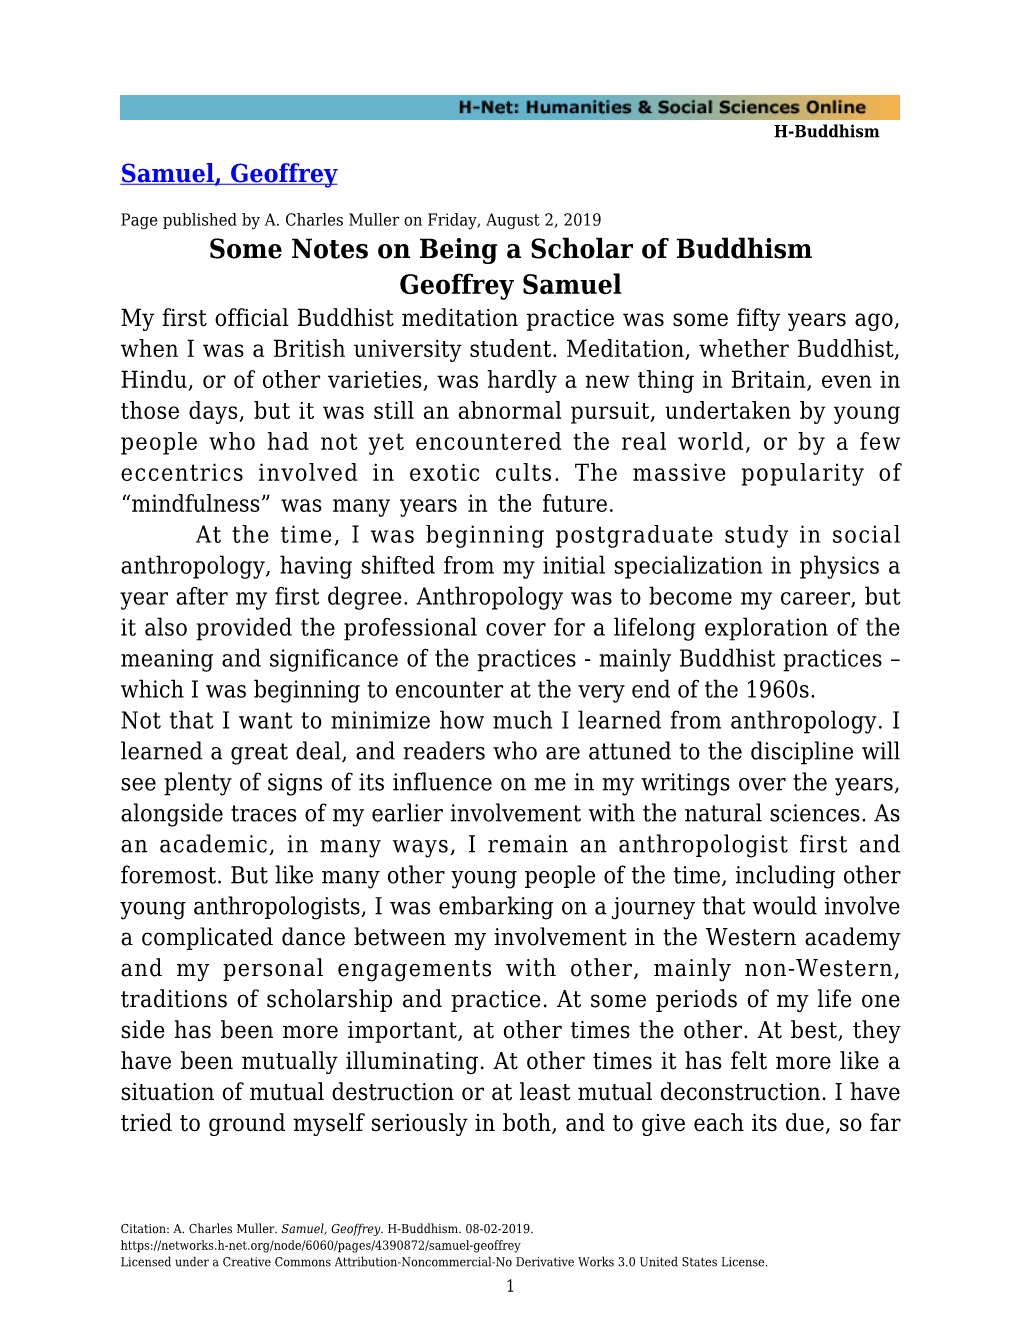 Some Notes on Being a Scholar of Buddhism Geoffrey Samuel